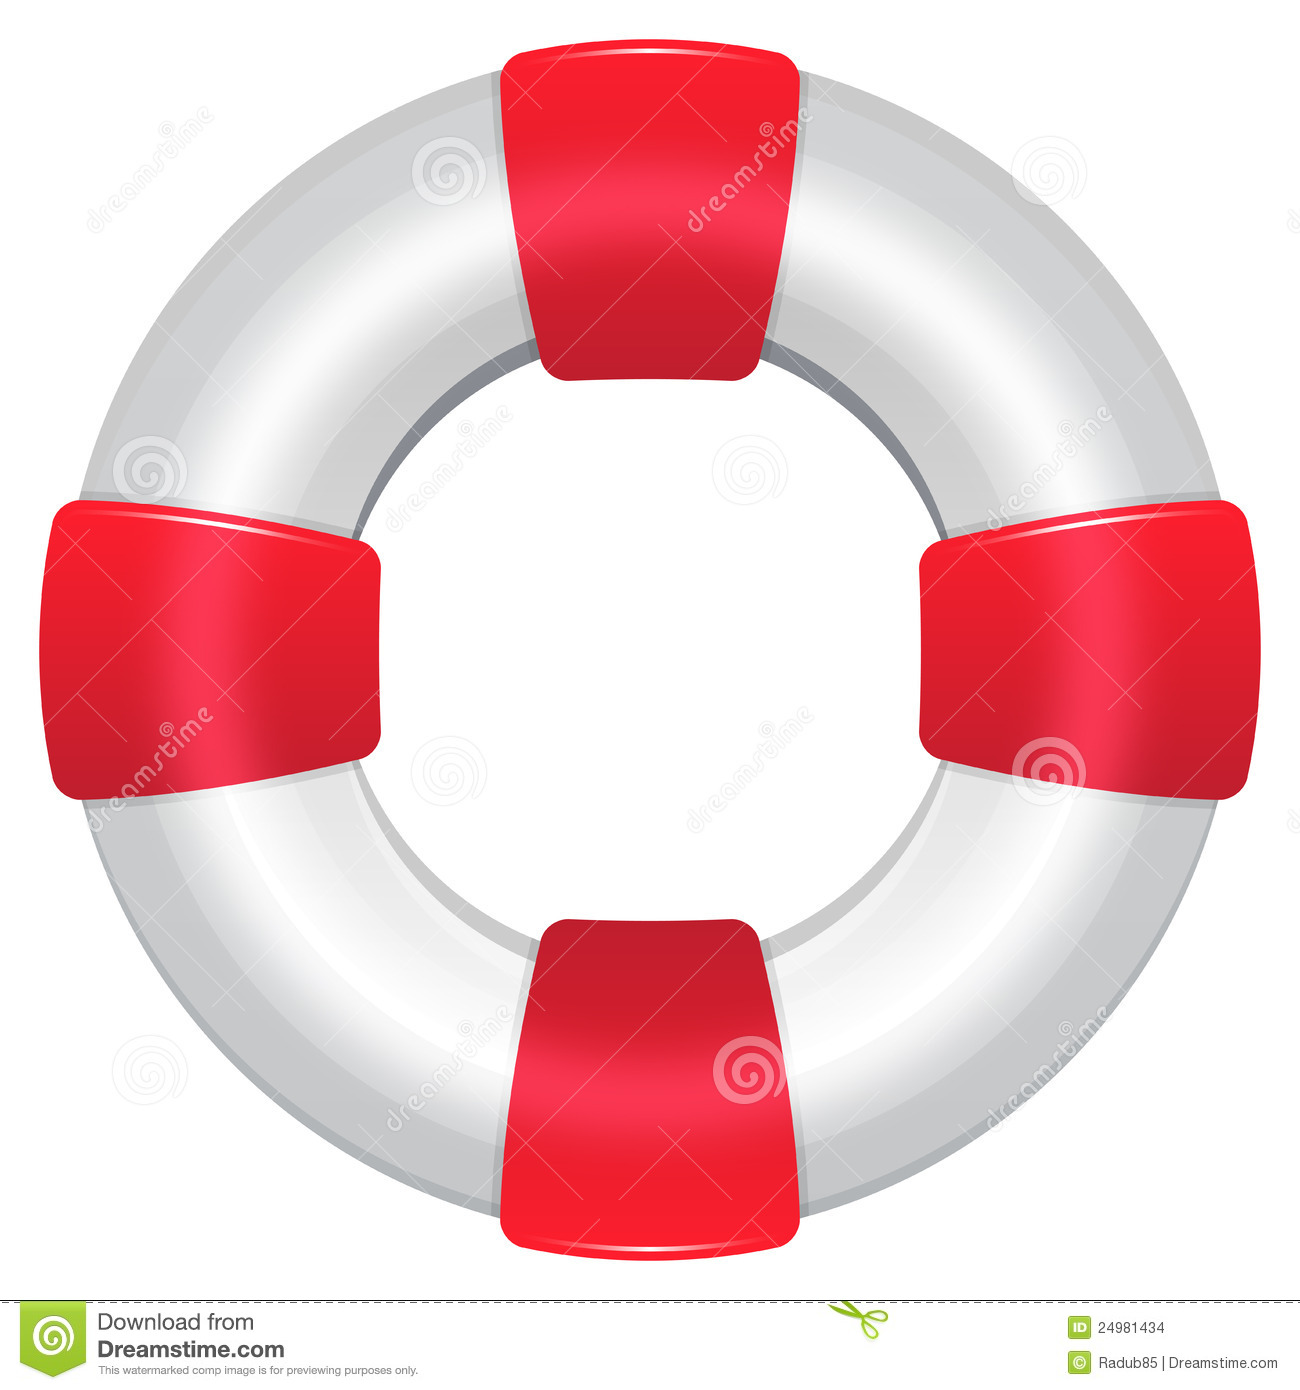 Life Preserver Stock Images   Image  24981434